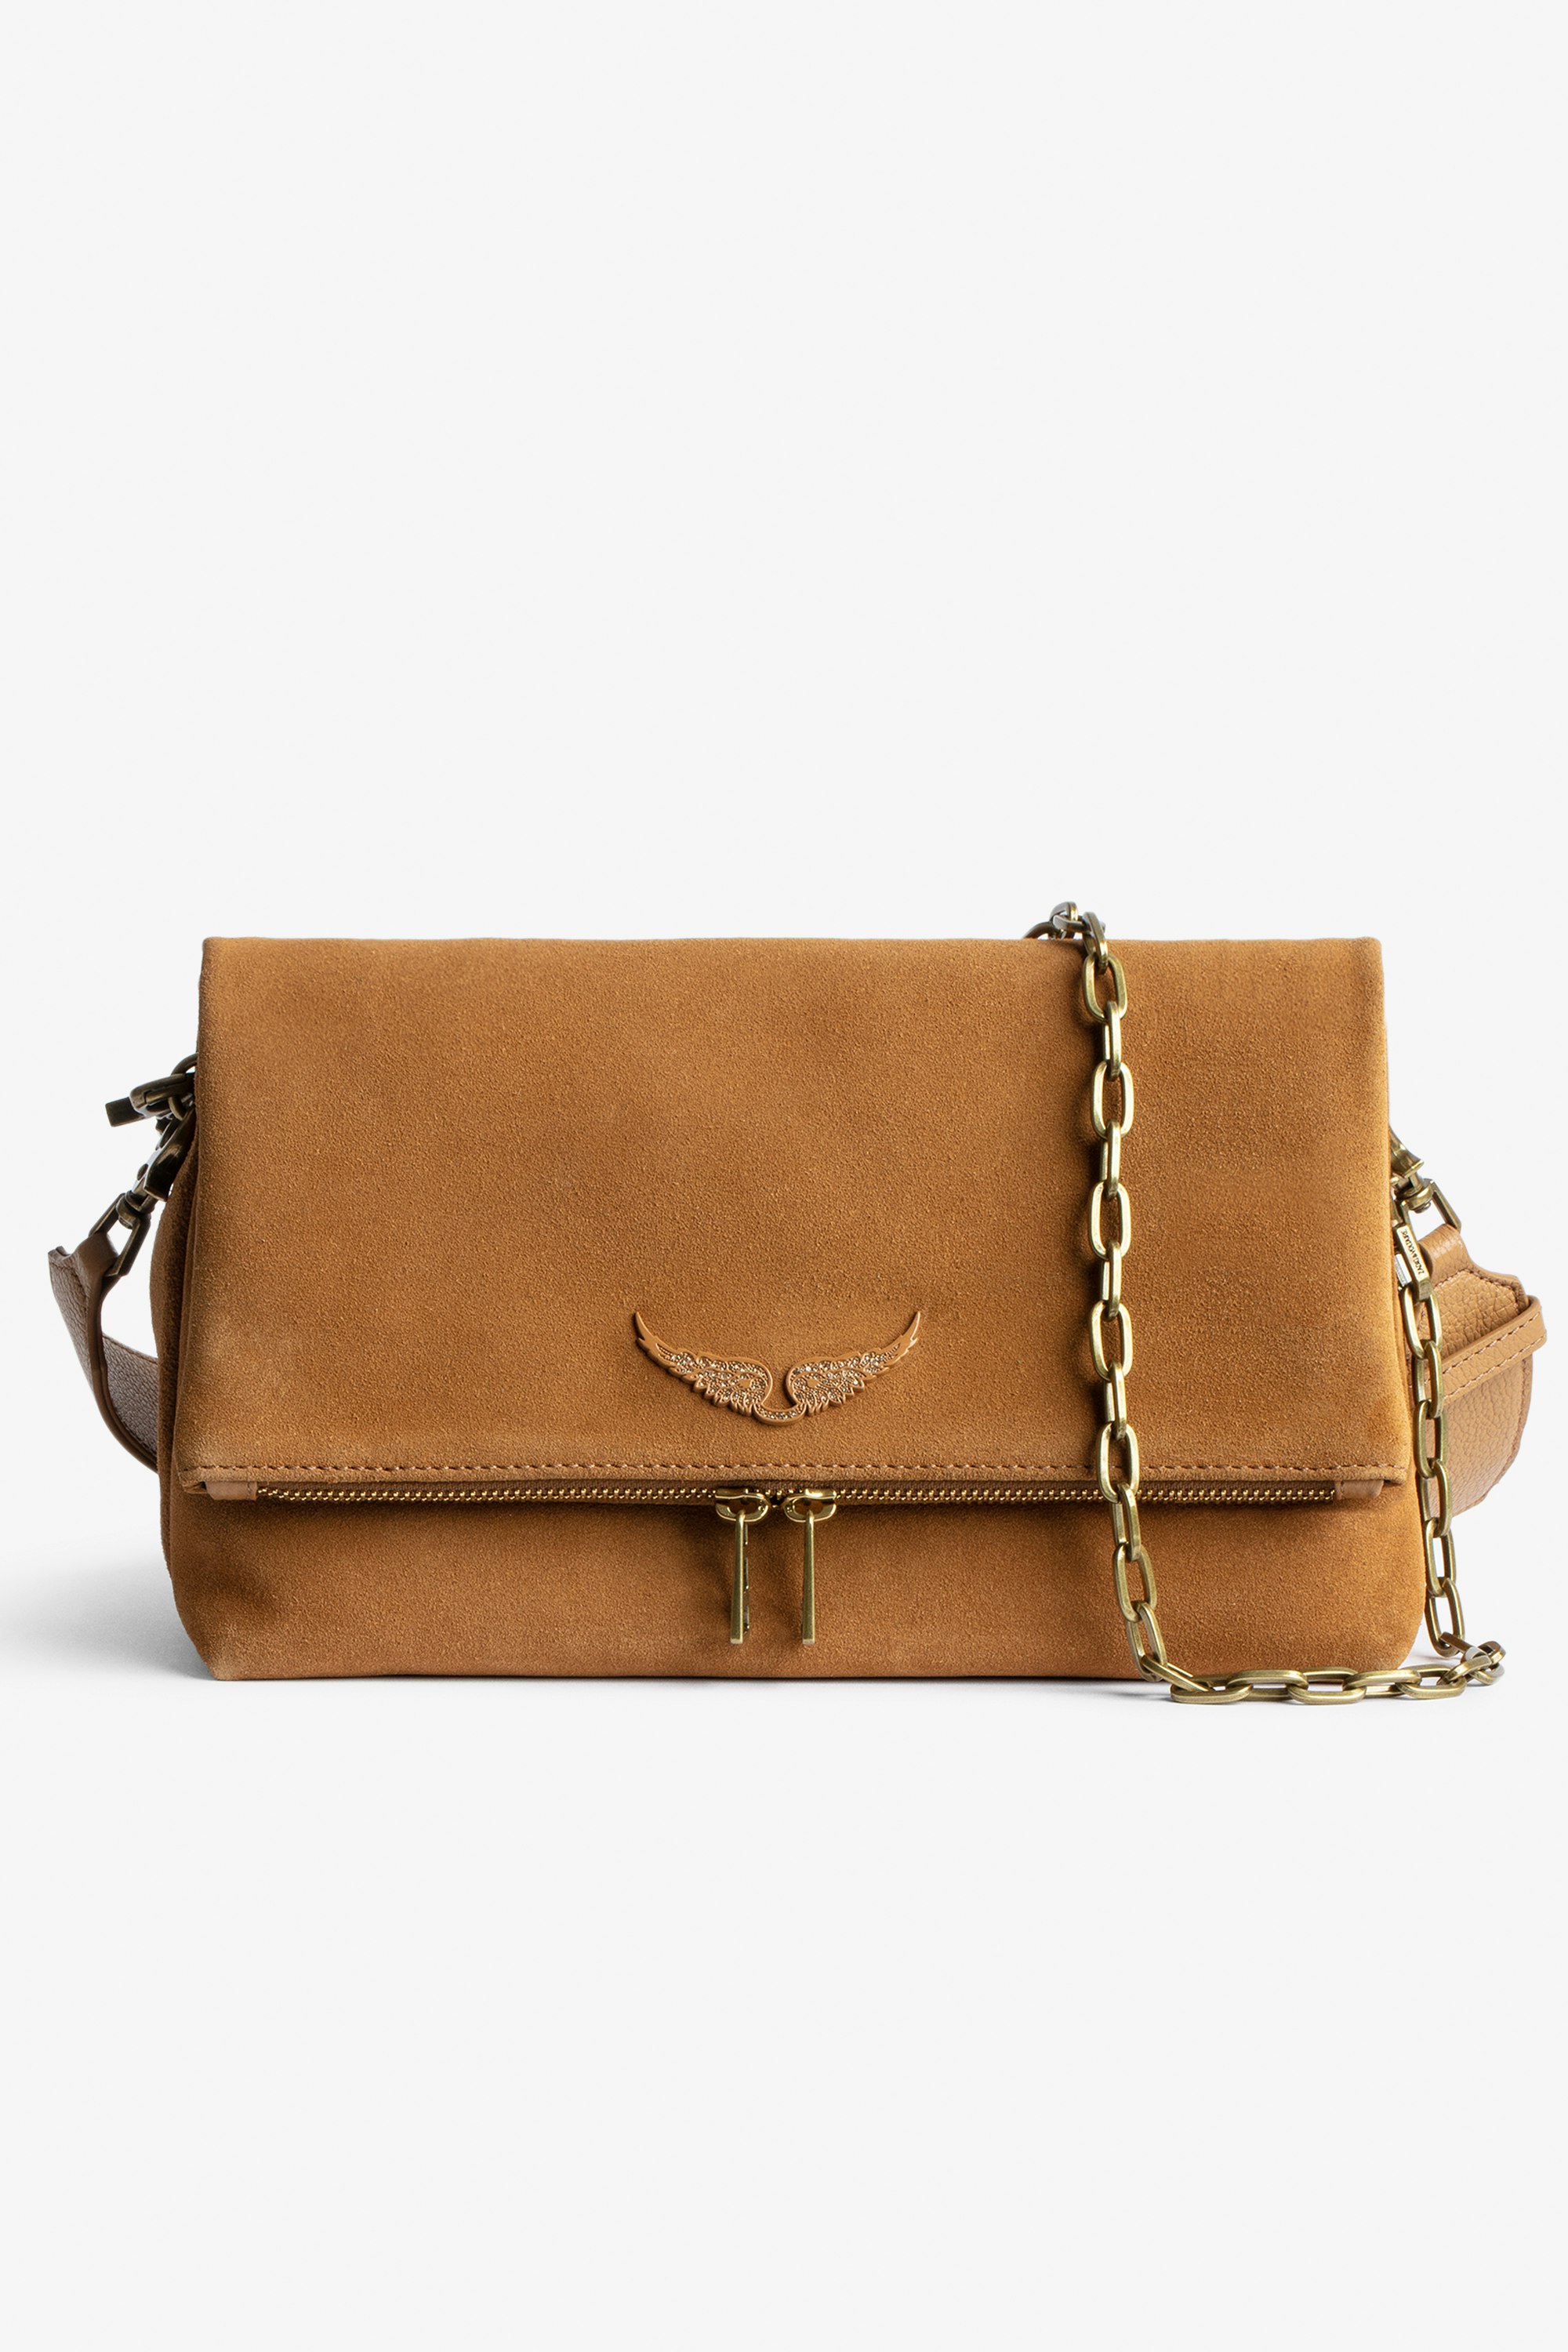 Rocky Suede Bag Women’s camel suede bag with shoulder strap and metal chain